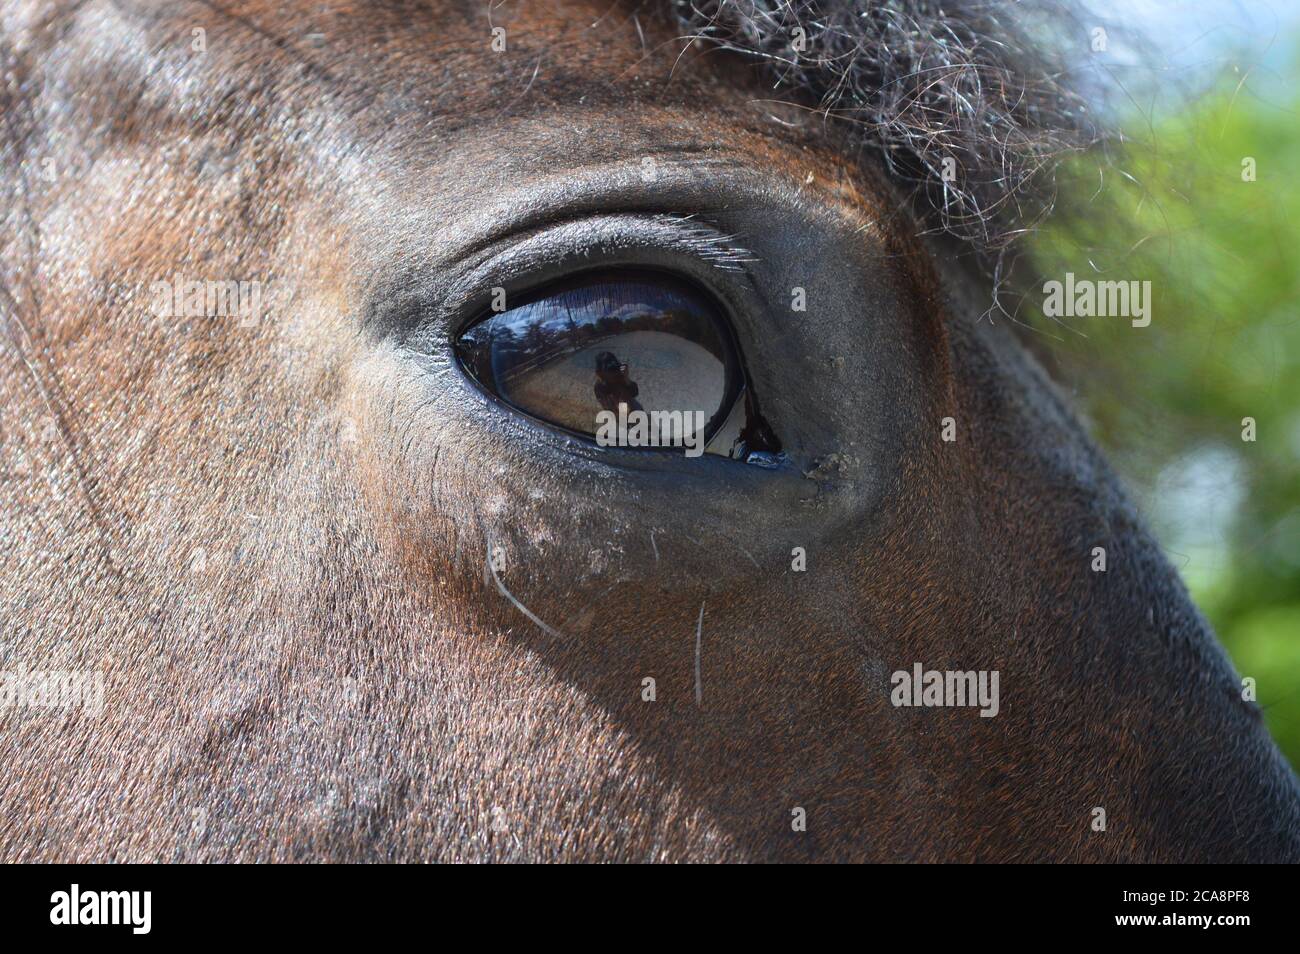 Close up of a horse's eye. Stock Photo